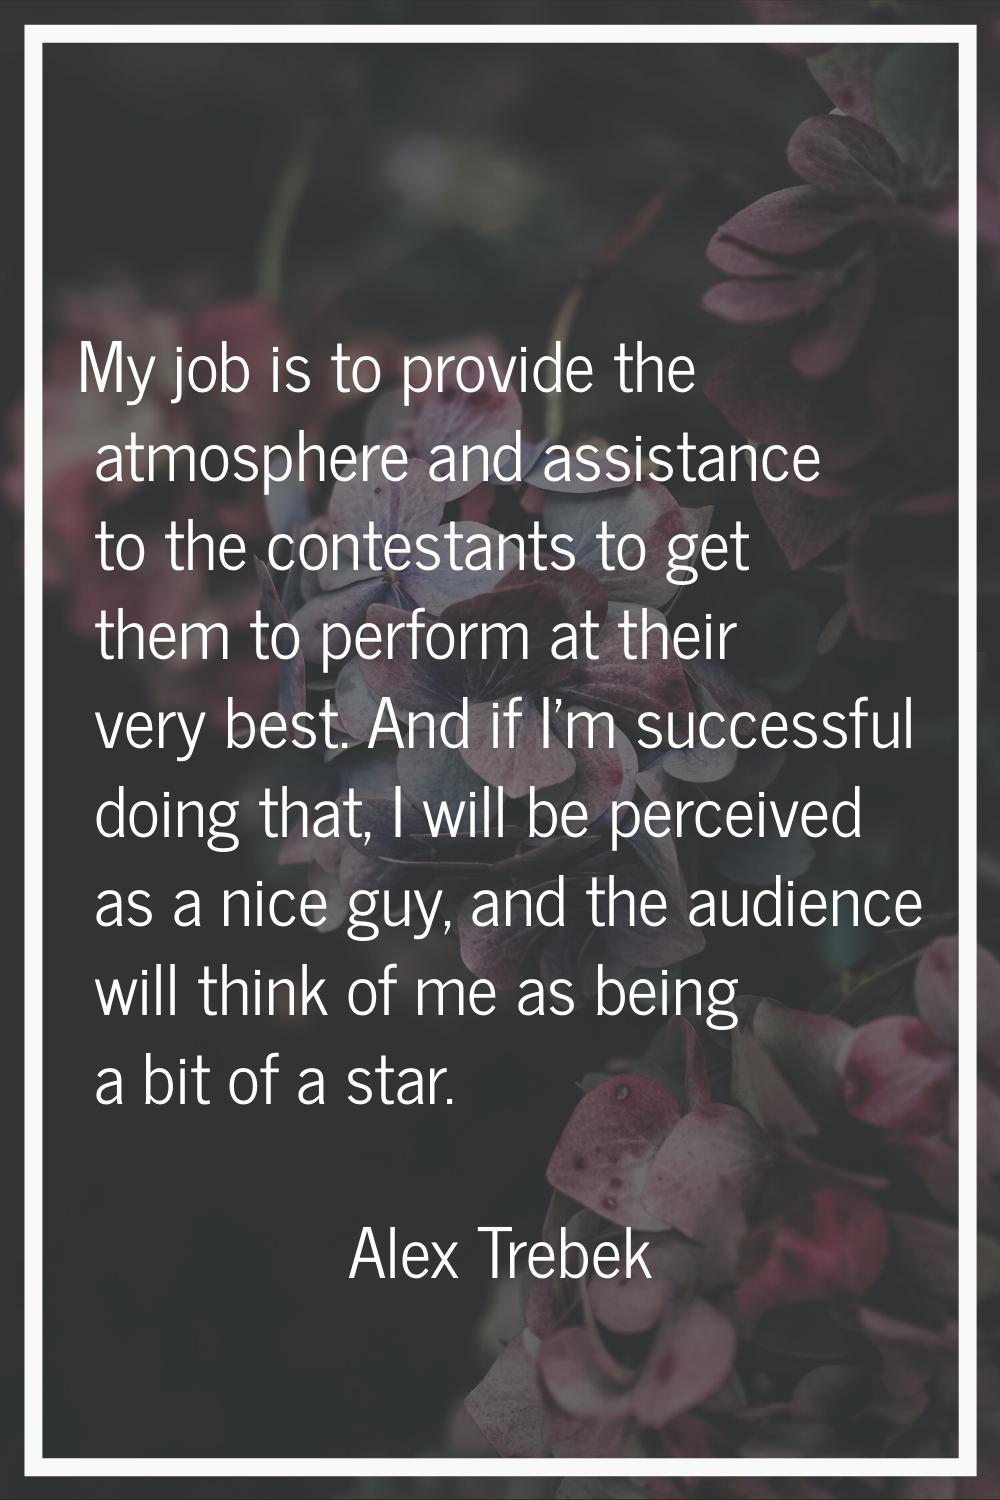 My job is to provide the atmosphere and assistance to the contestants to get them to perform at the